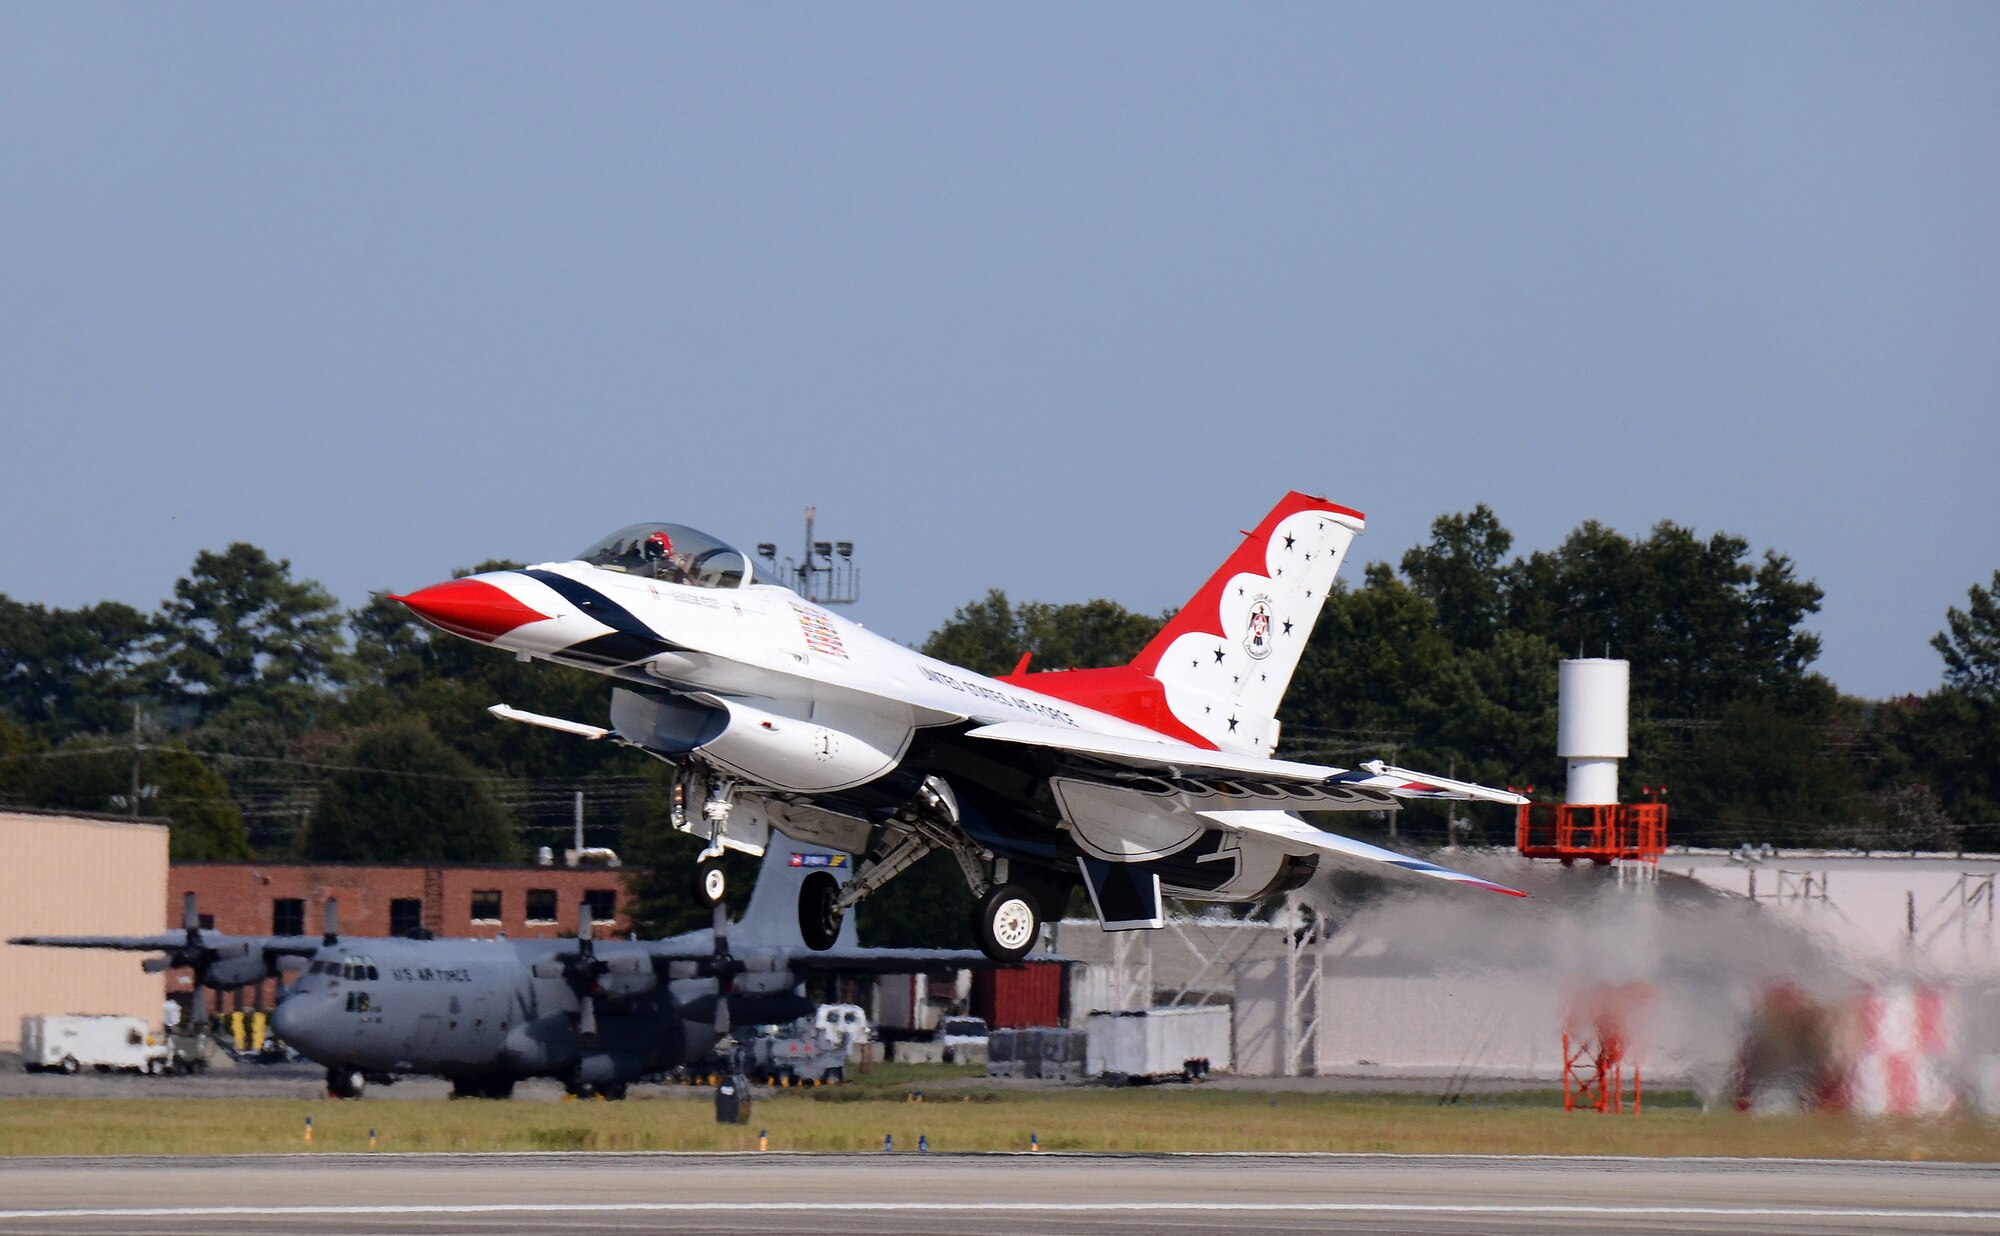 Thunderbird #1, Lt. Col. Greg Moseley, departs Dobbins Air Reserve Base for the Wings Over North Georgia air show Oct. 18, 2014. The USAF Air Demonstration Squadron Thunderbirds are using Dobbins as their base of operations for their performances at the air show this weekend at the Russell Regional Airport in Rome, Georgia. (U.S. Air Force photo/ Brad Fallin/Released)